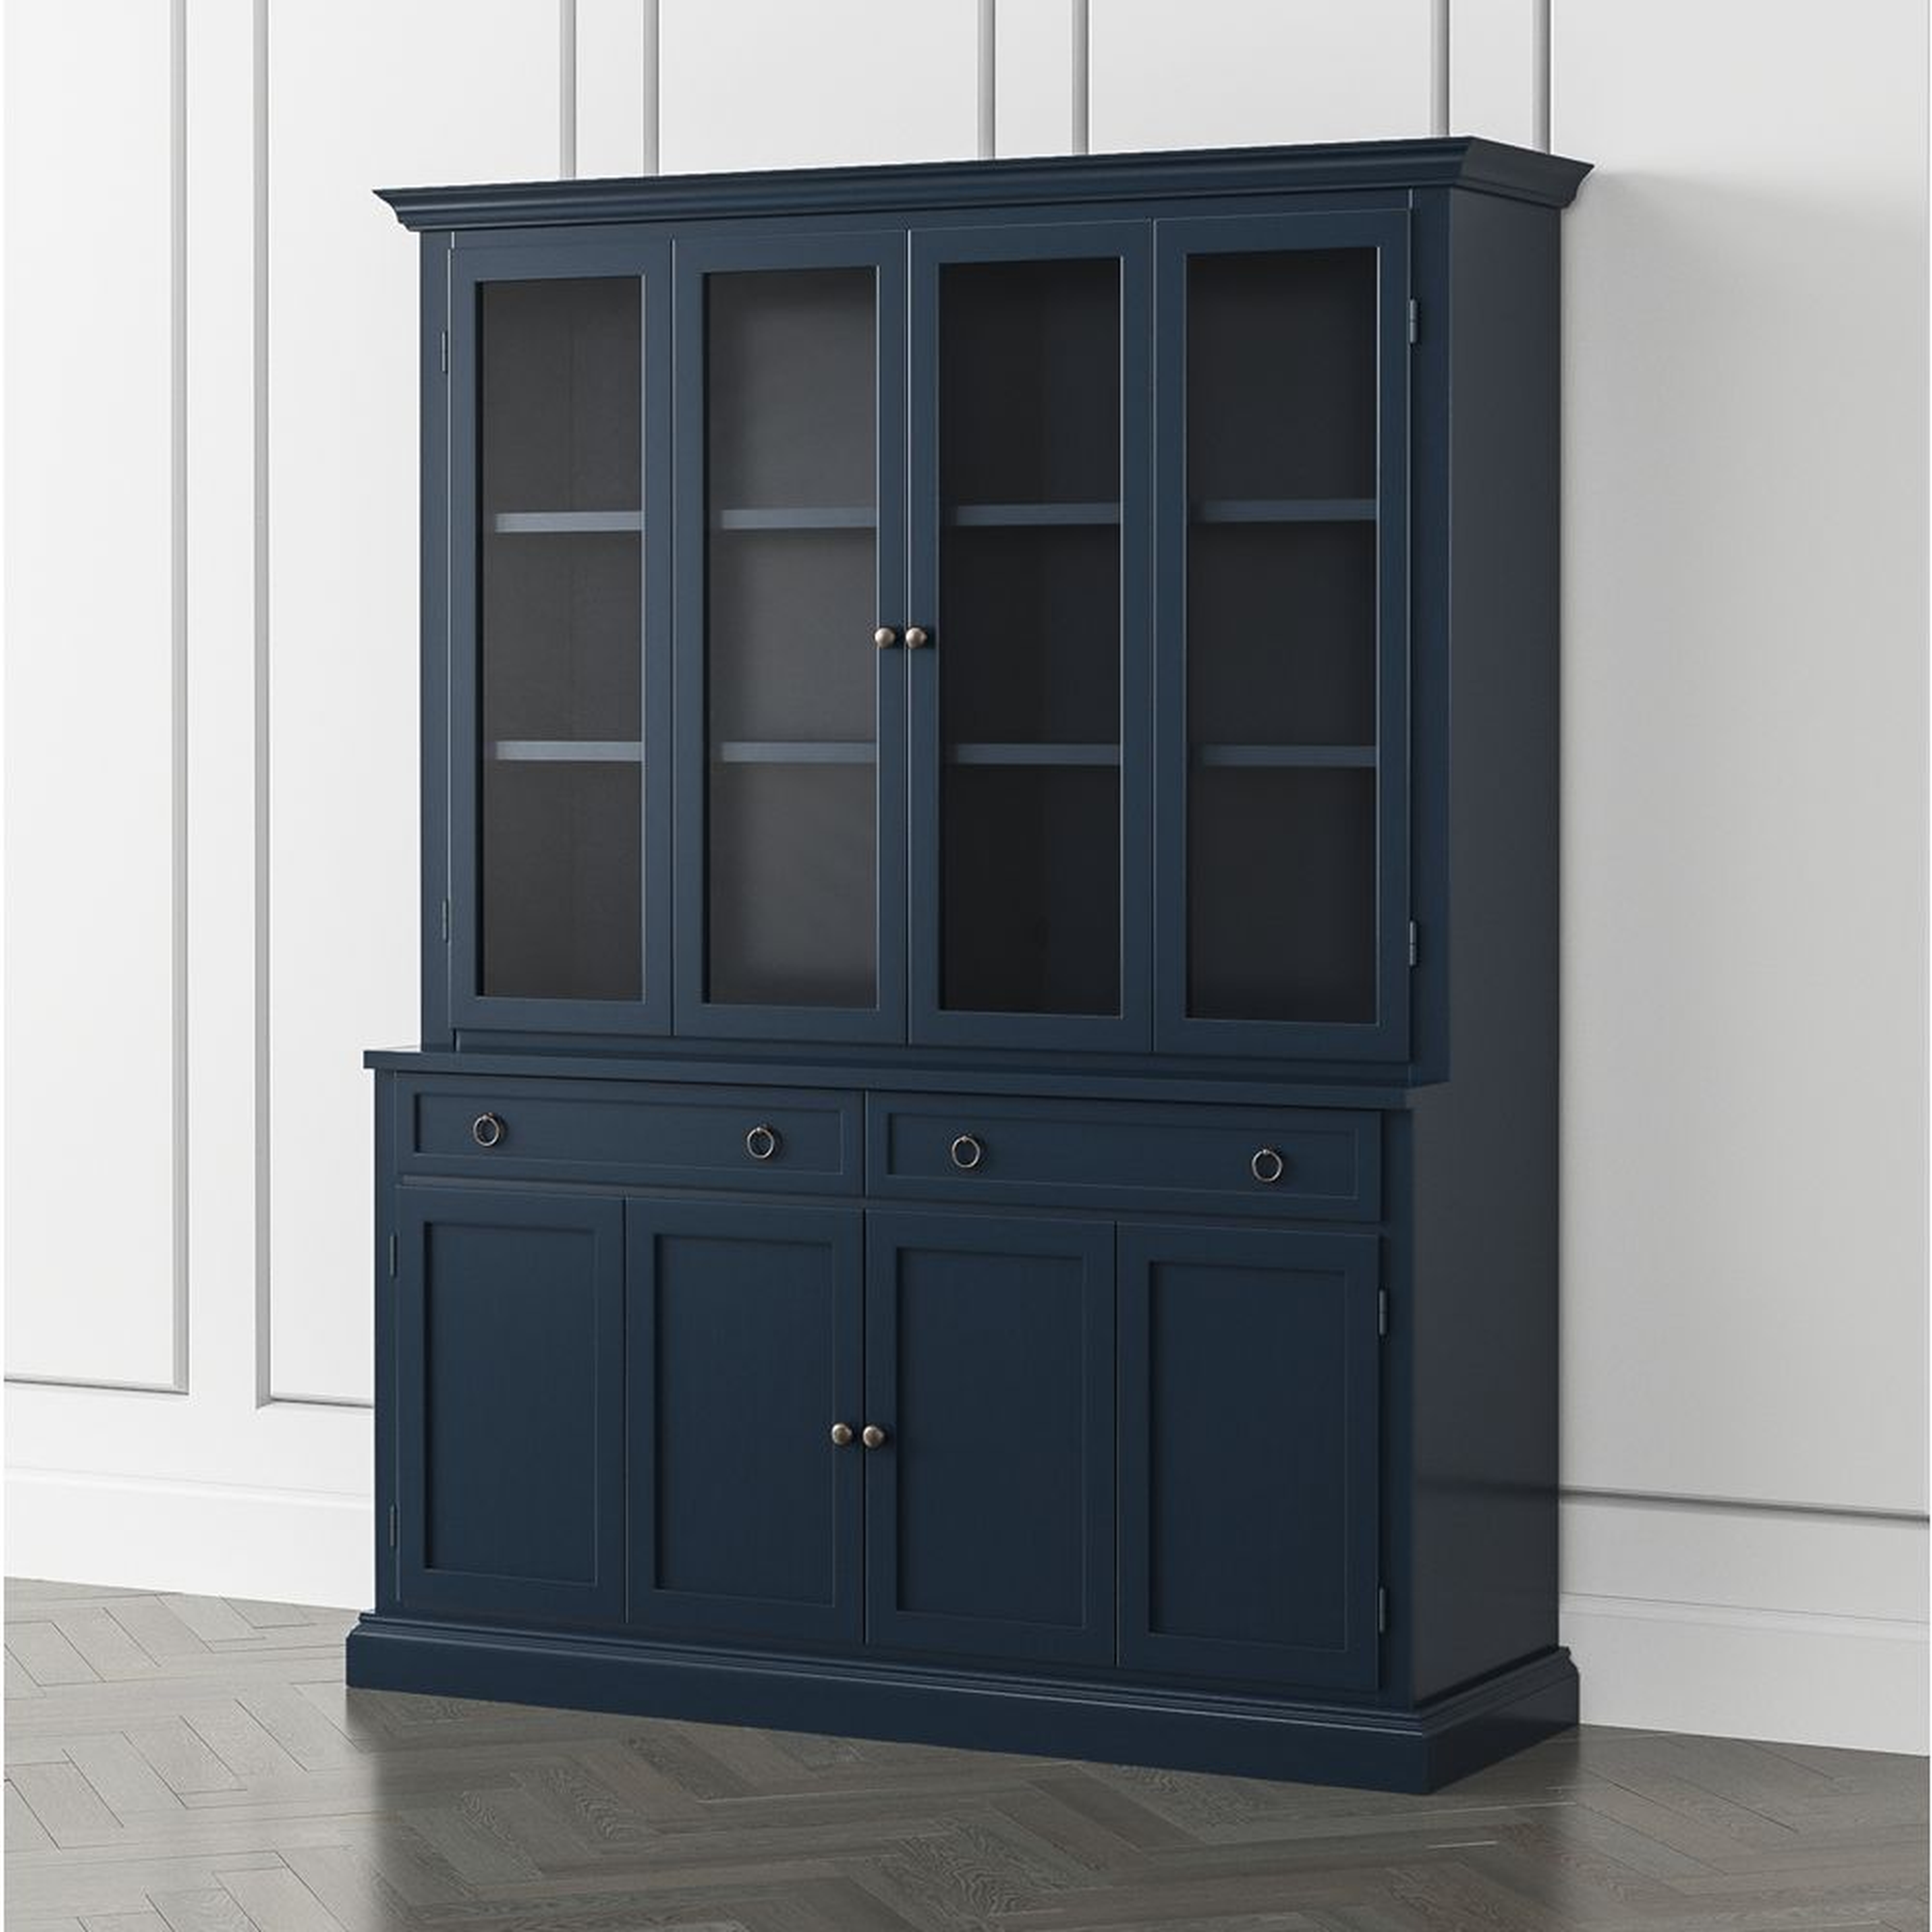 Cameo Indigo 2-Piece Entertainment Center with Wood and Glass Doors - Crate and Barrel